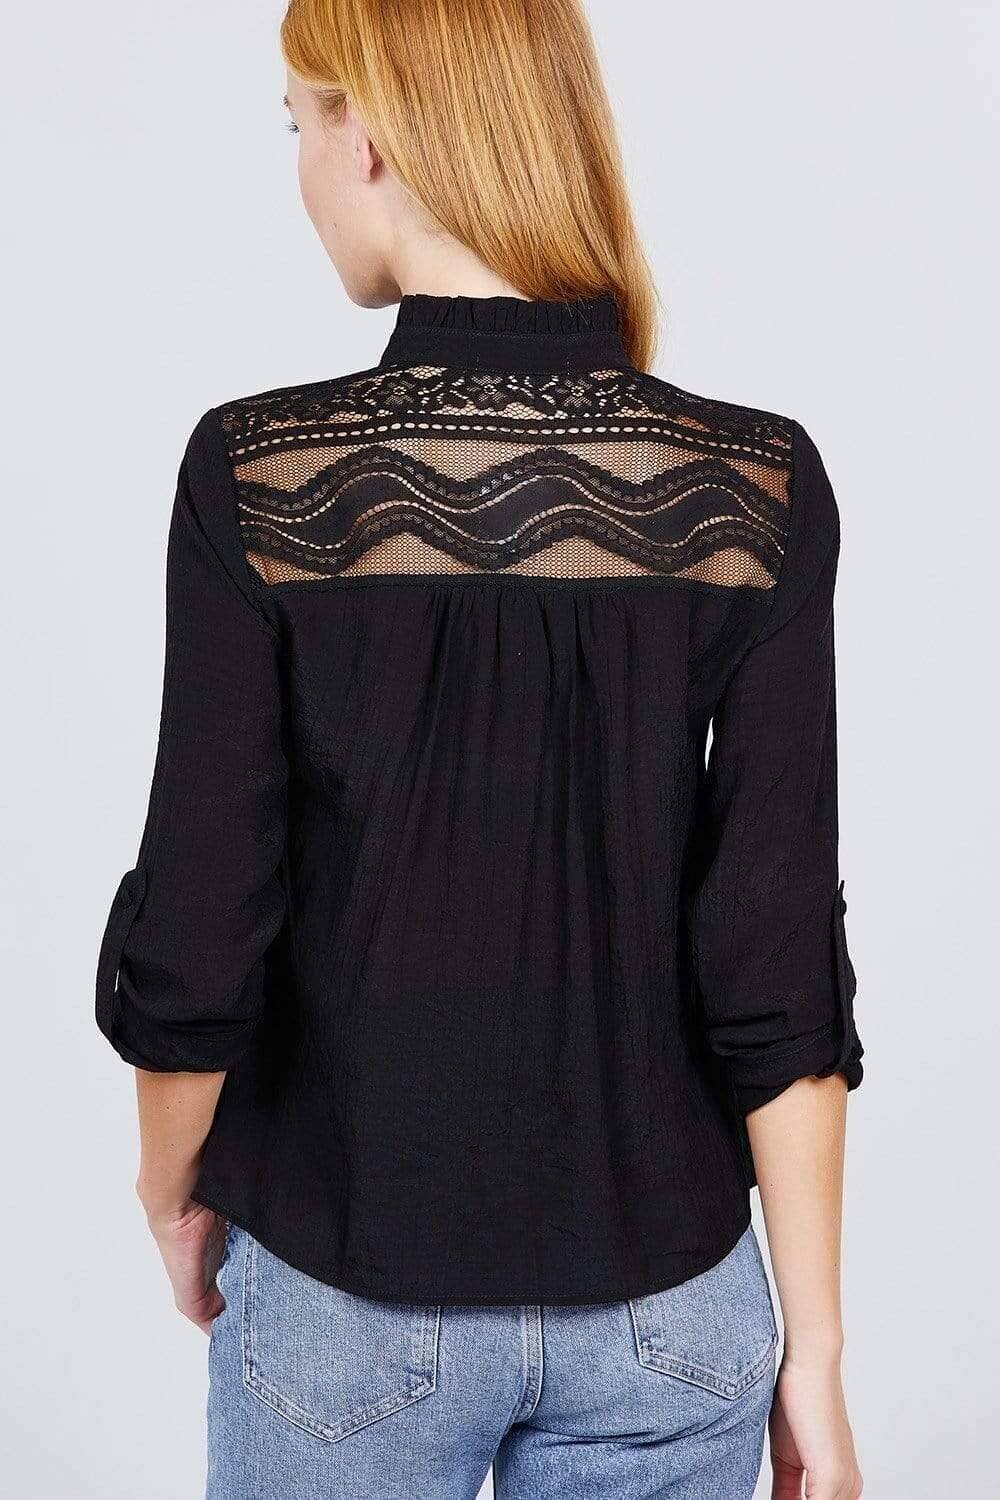 Black Long Sleeve V-Neck Button Down Top - Shopping Therapy S Top